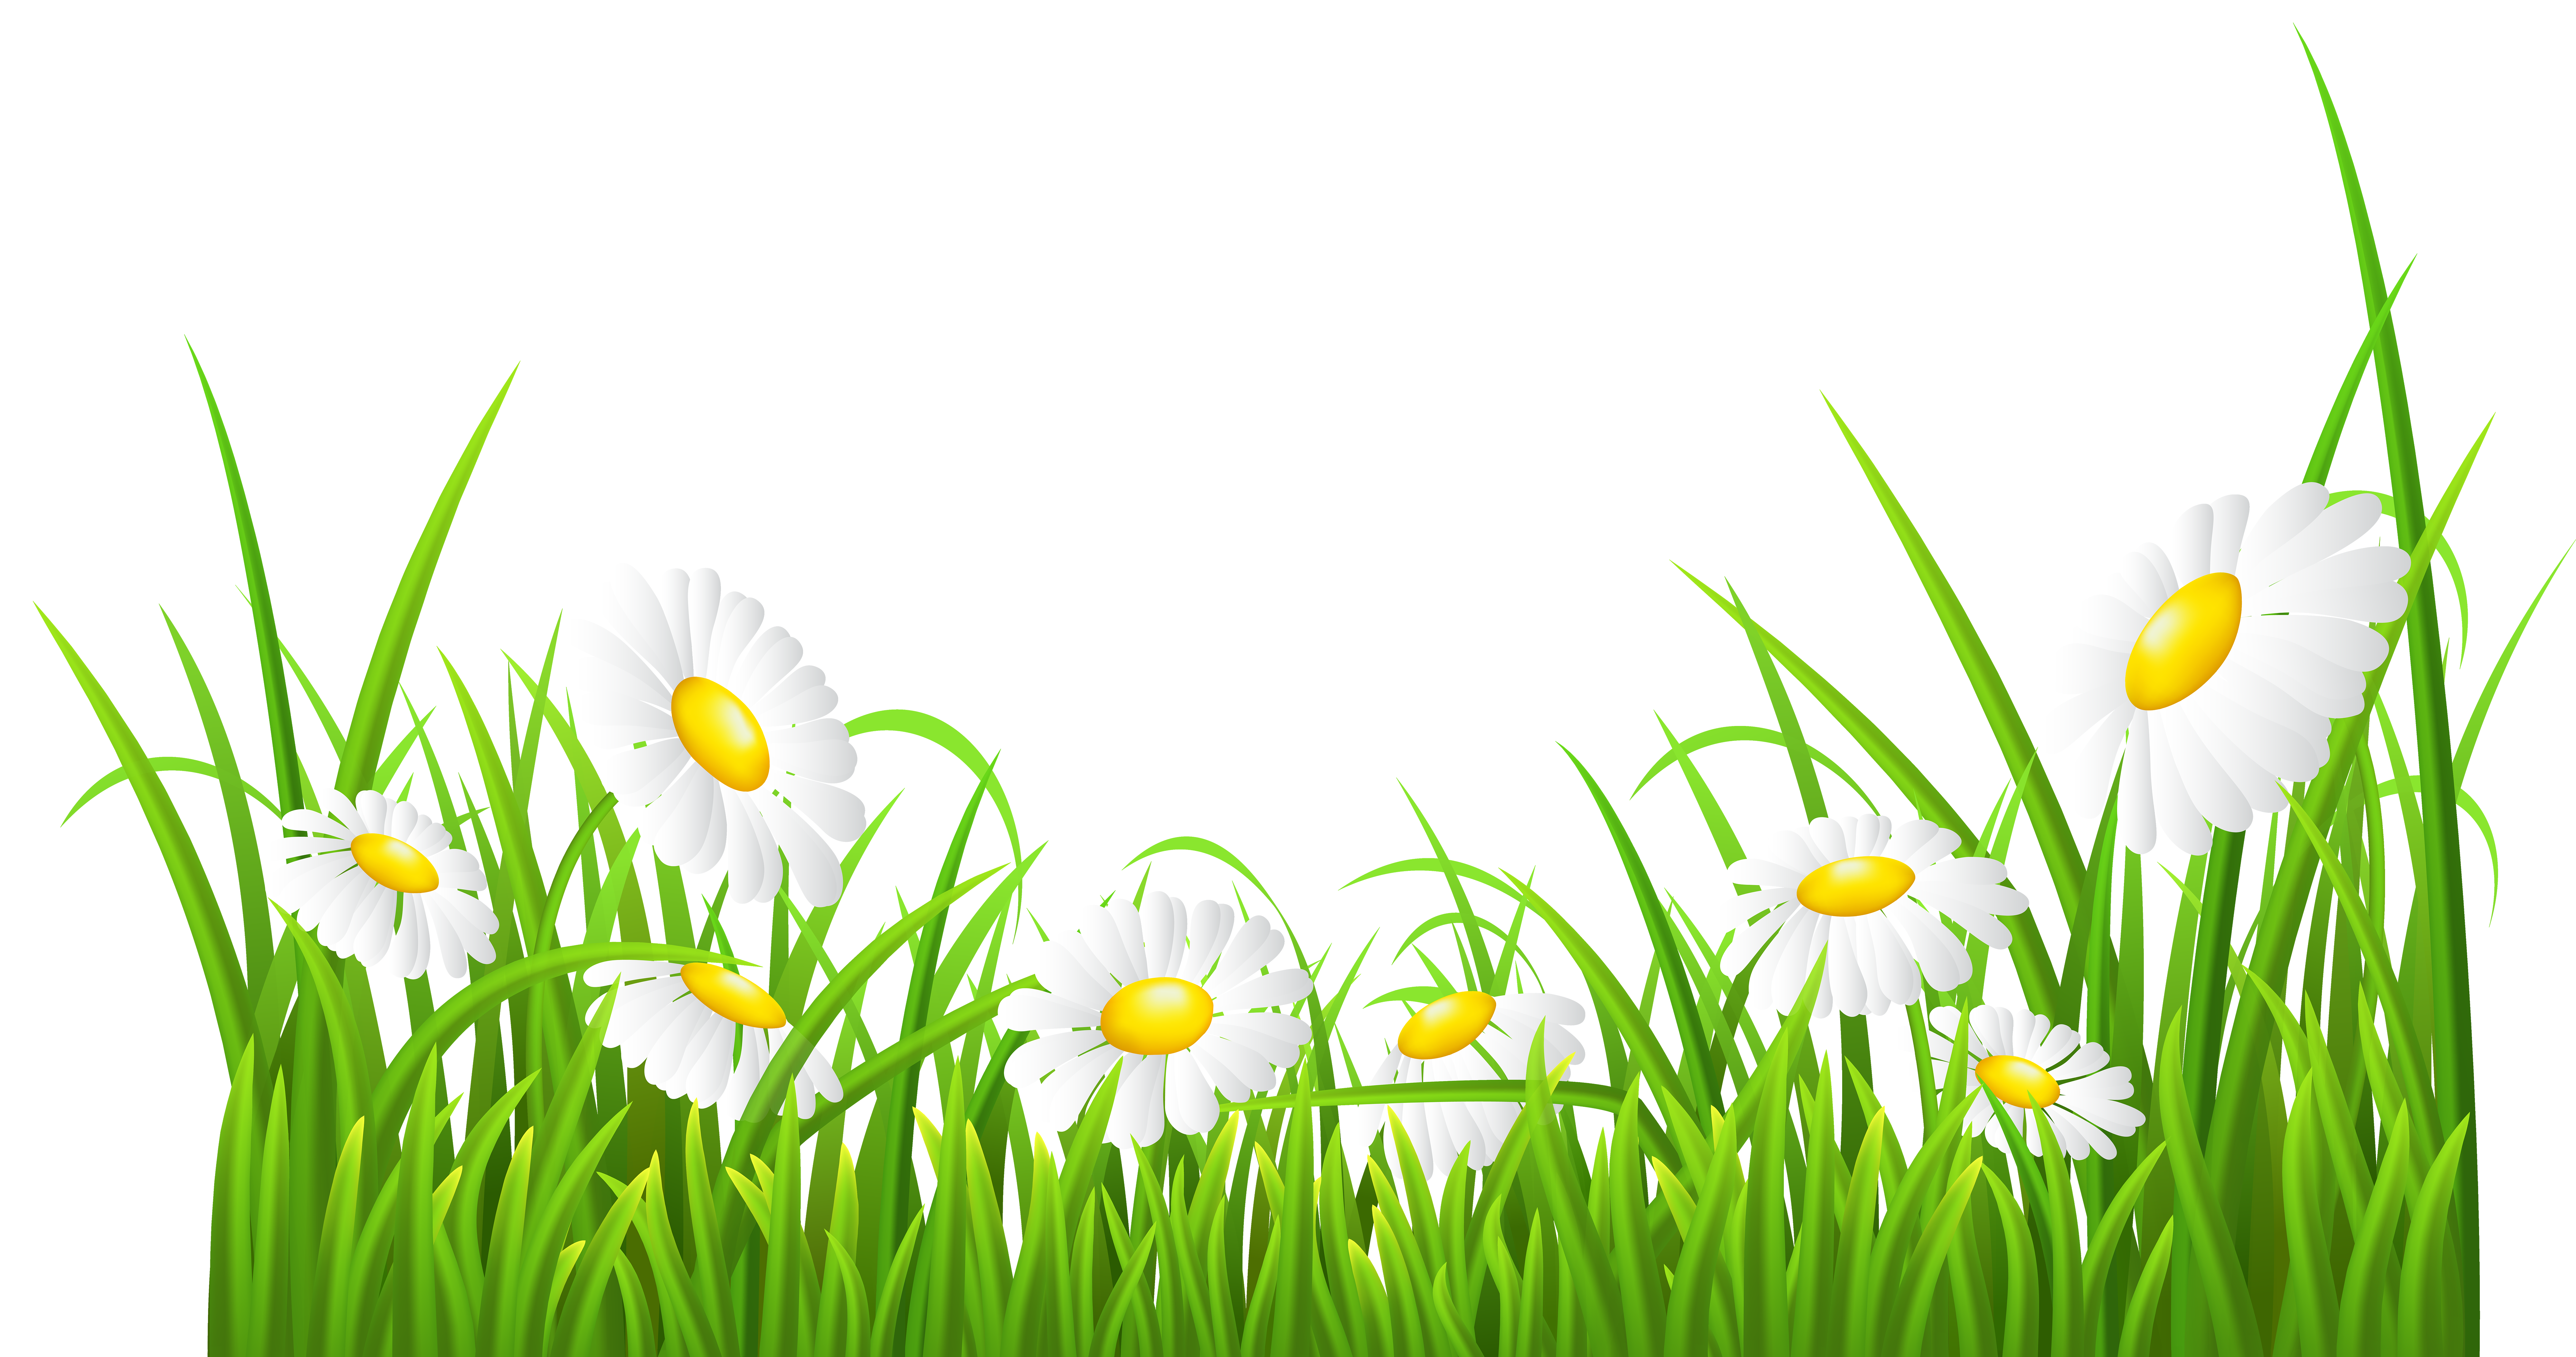 Clipart rock lawn. White daisies and grass